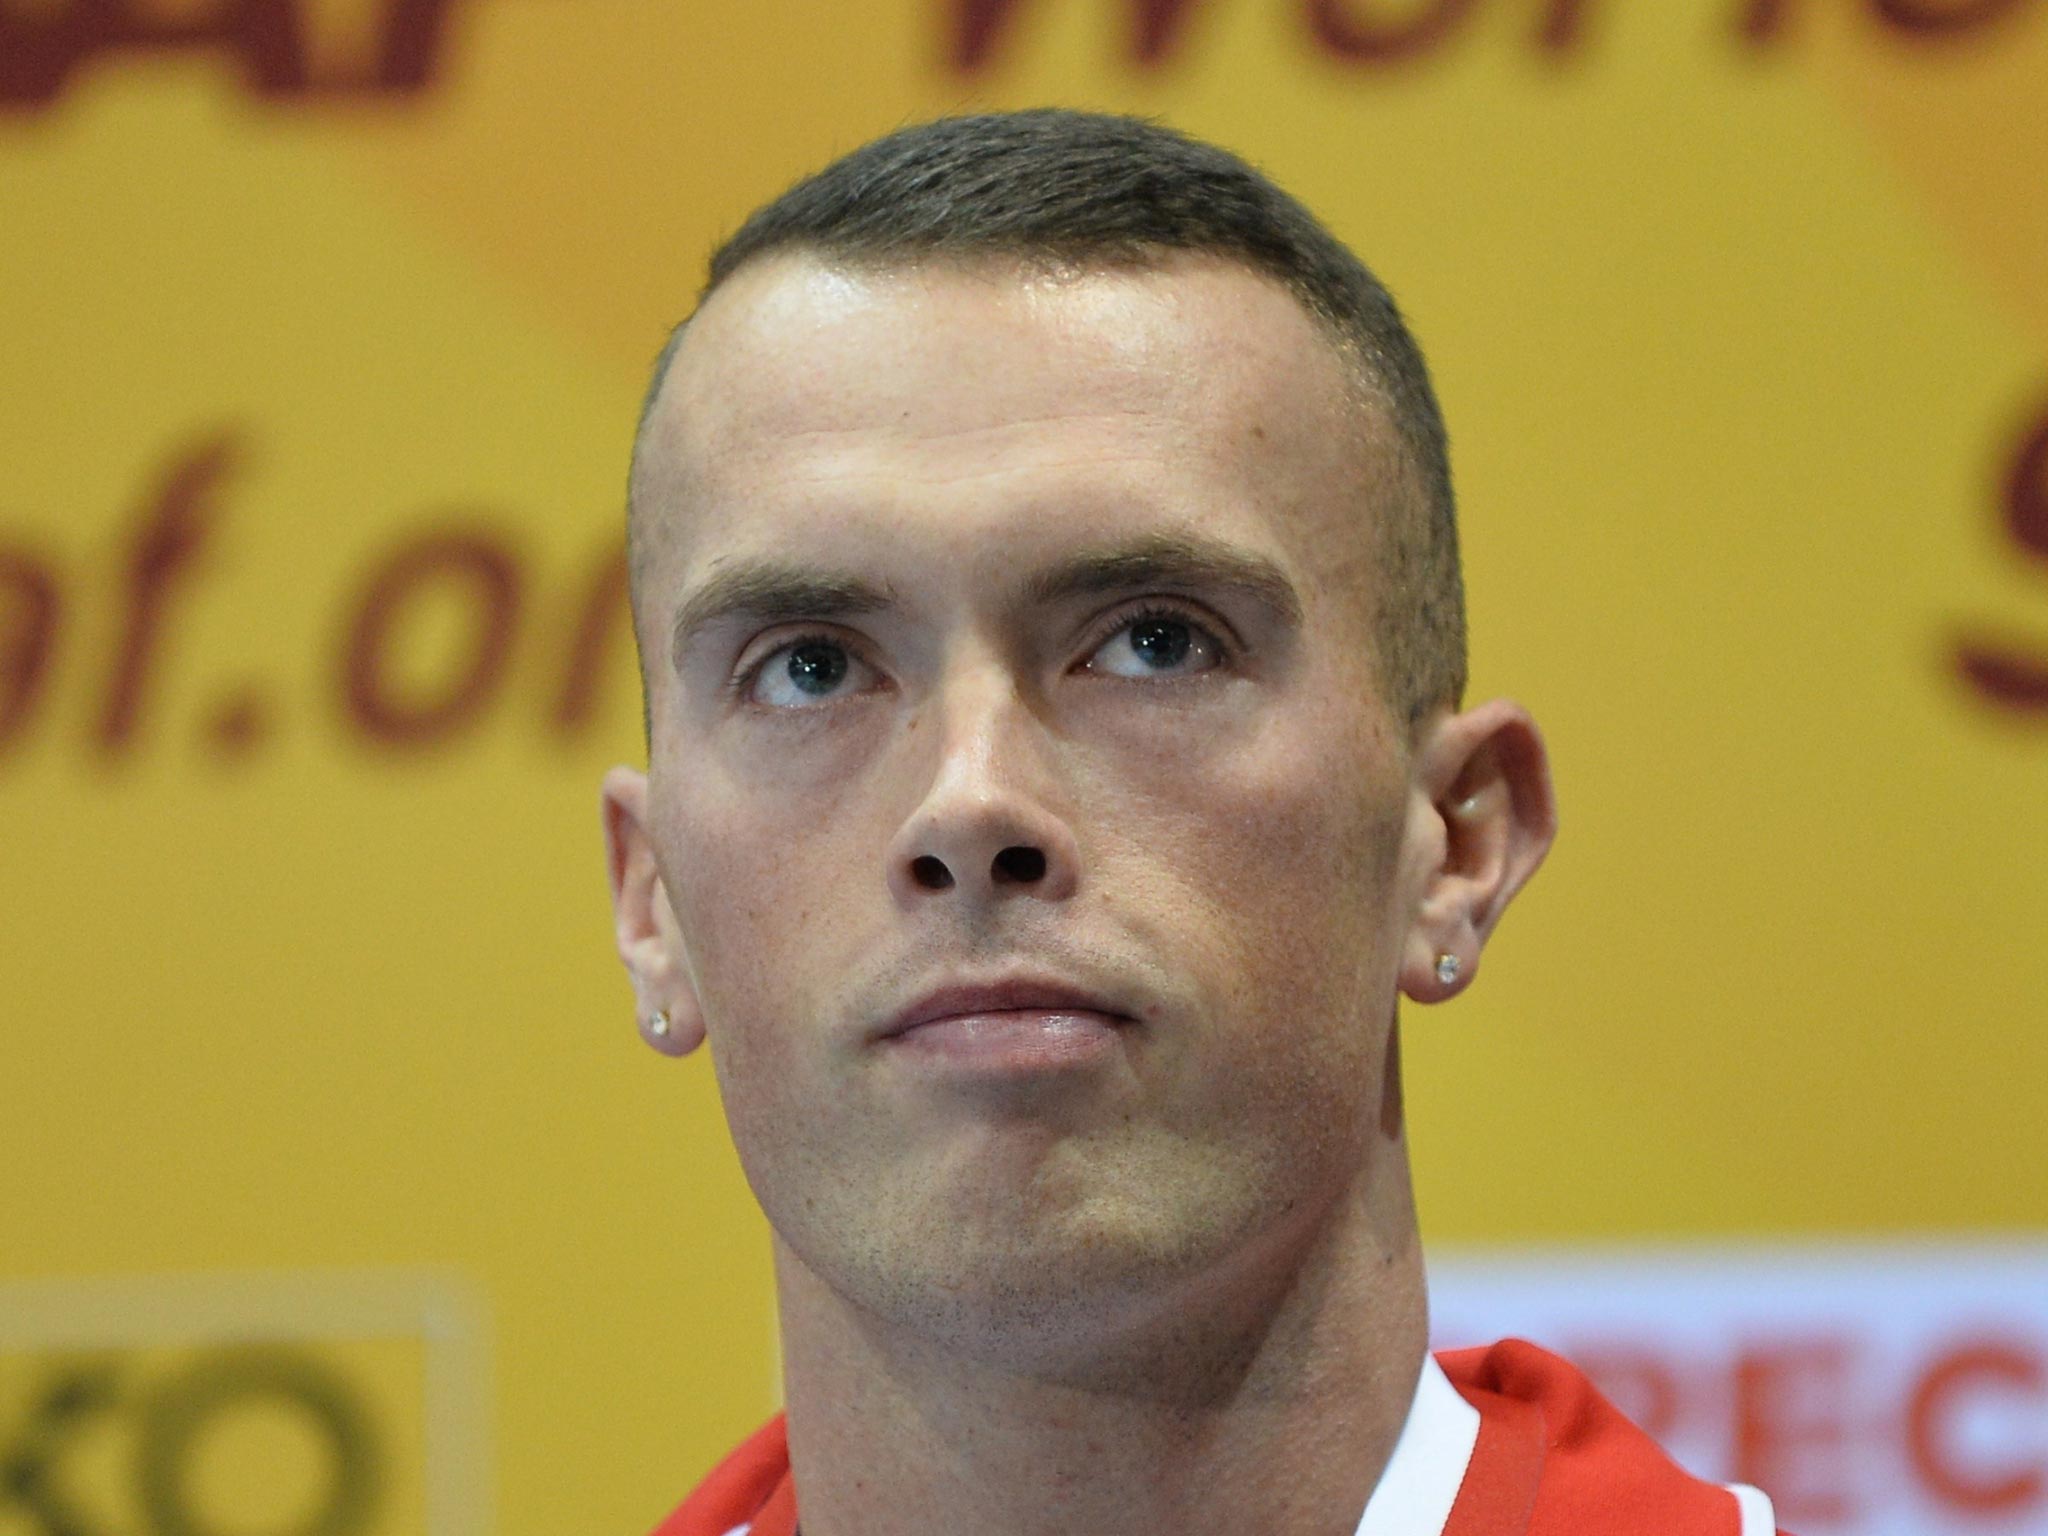 Richard Kilty believes his fellow British sprinters must
put their personal differences aside